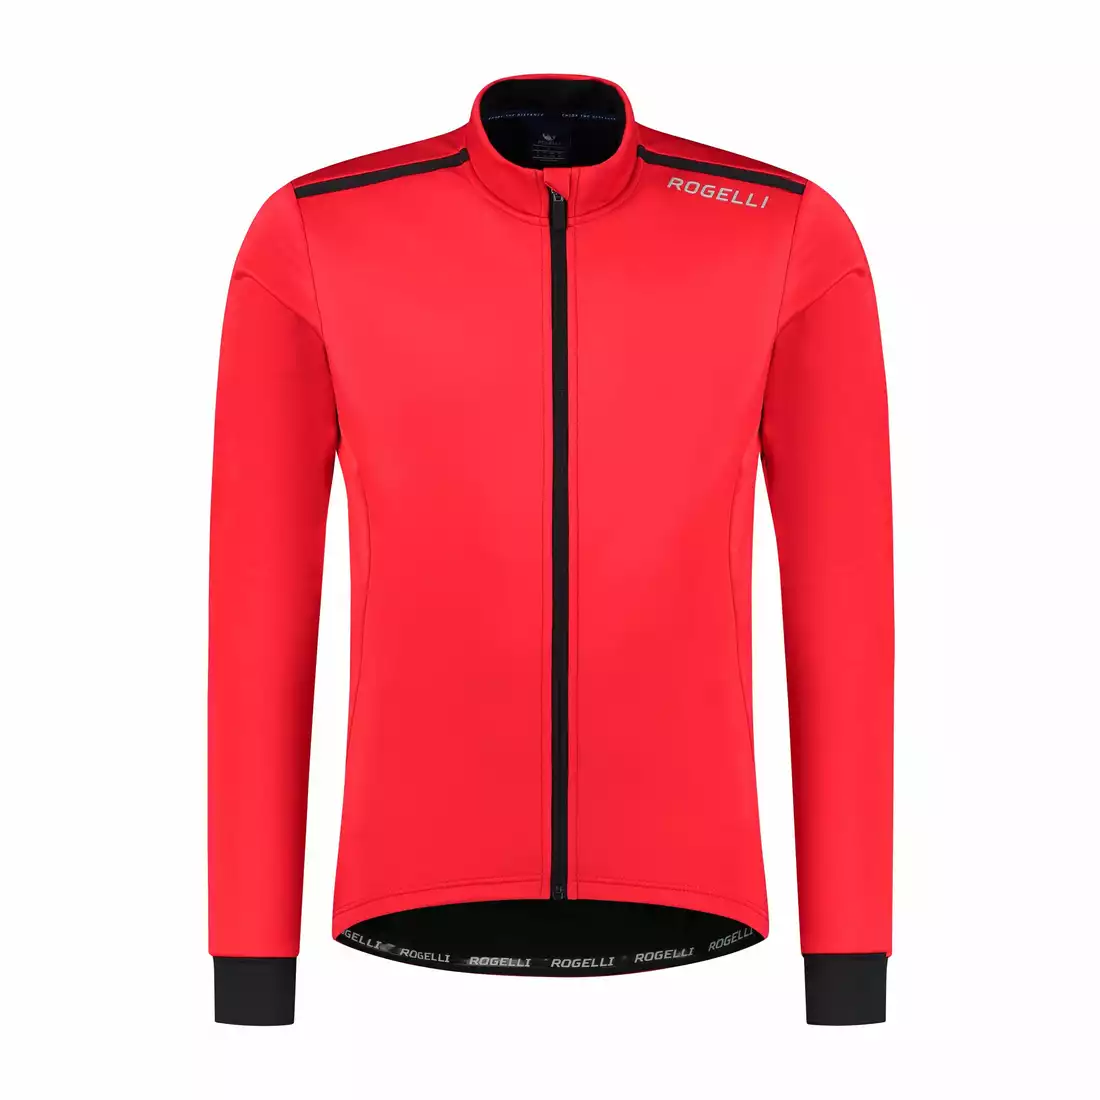 ROGELLI CORE children's winter cycling jacket red